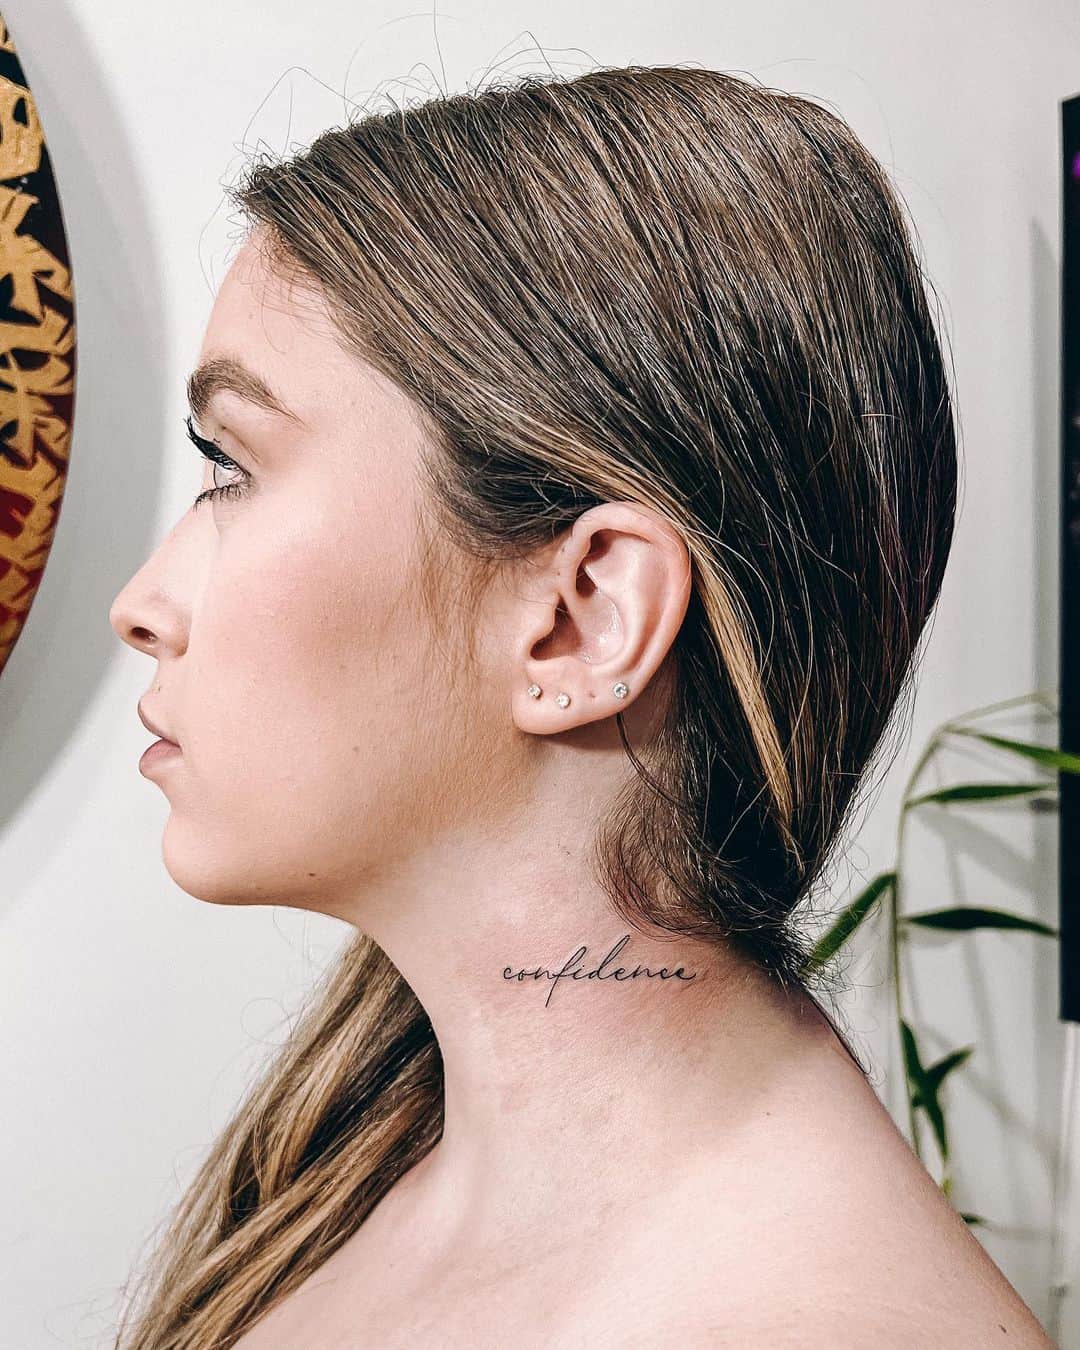 Neck Tattoos: What to Know Before Getting One | POPSUGAR Beauty